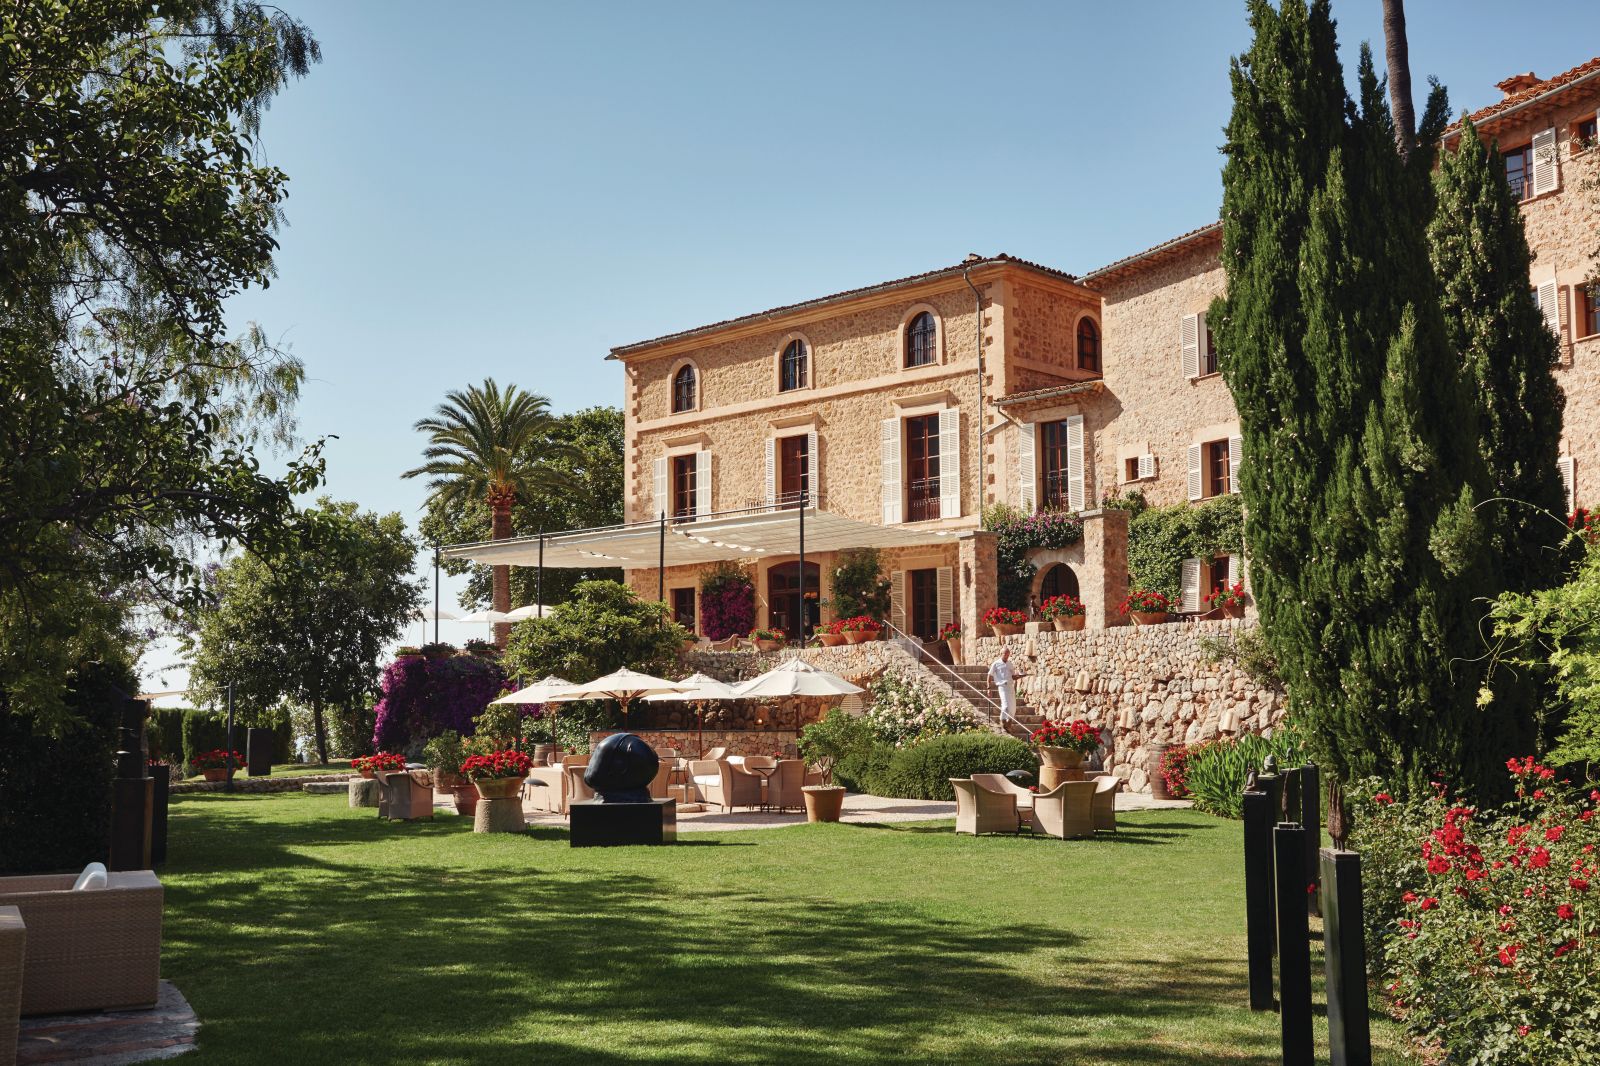 Exterior and grounds of Belmond La Residencia hotel in Mallorca